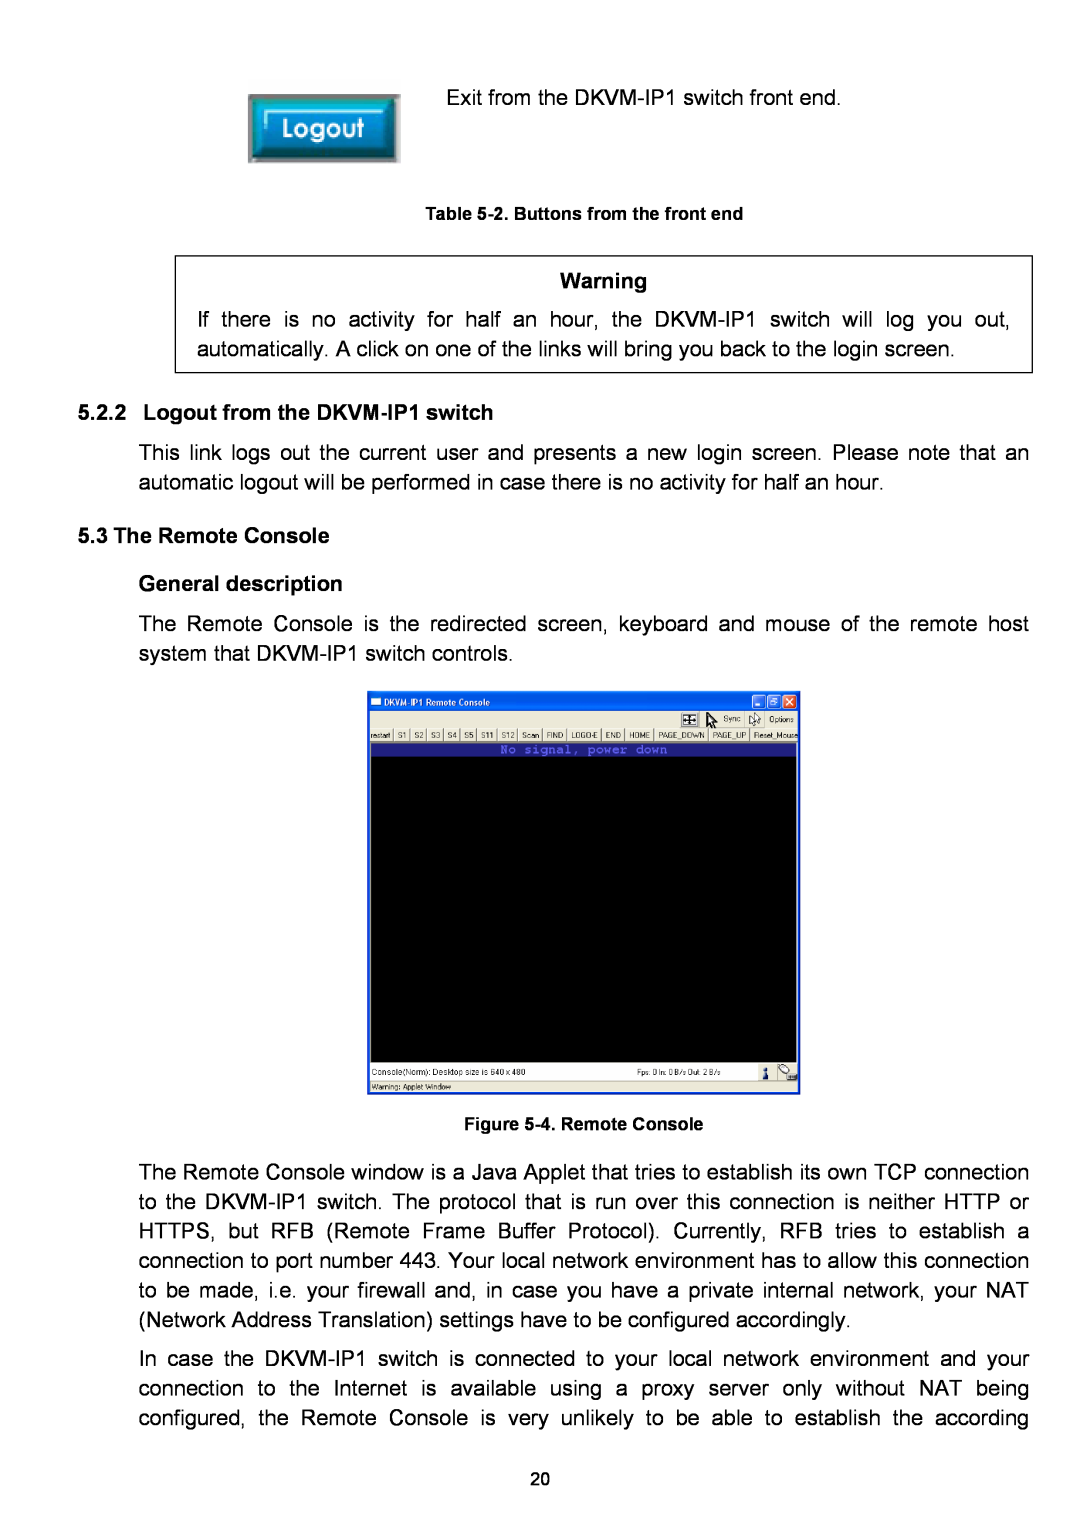 D-Link manual Logout from the DKVM-IP1 switch, The Remote Console General description 